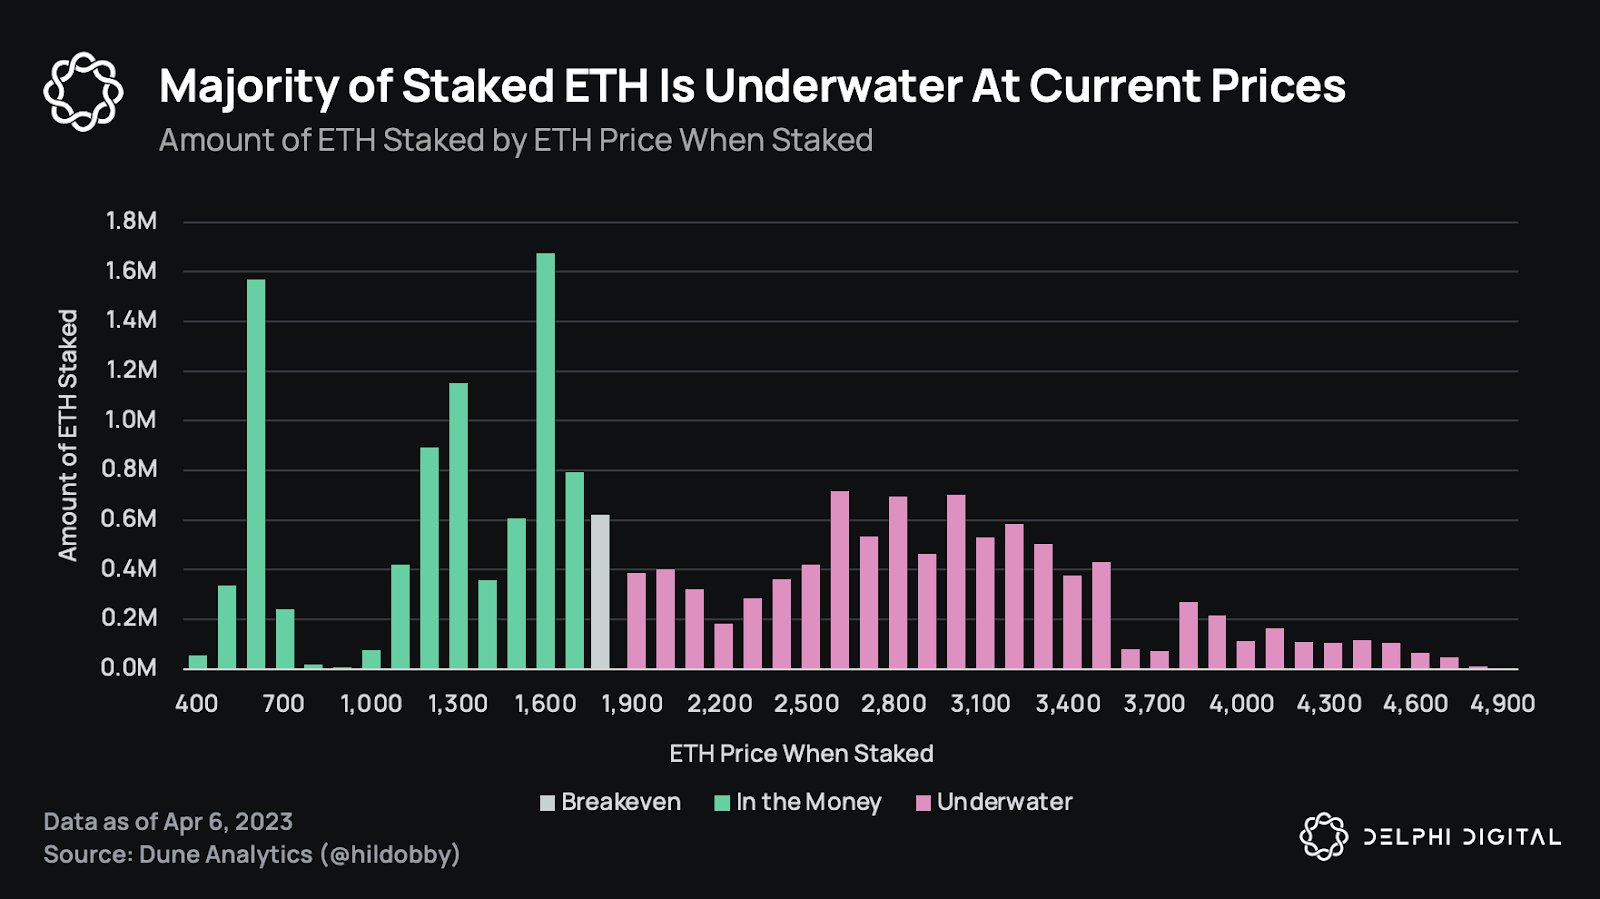 Majority Of Staked ETH is under water